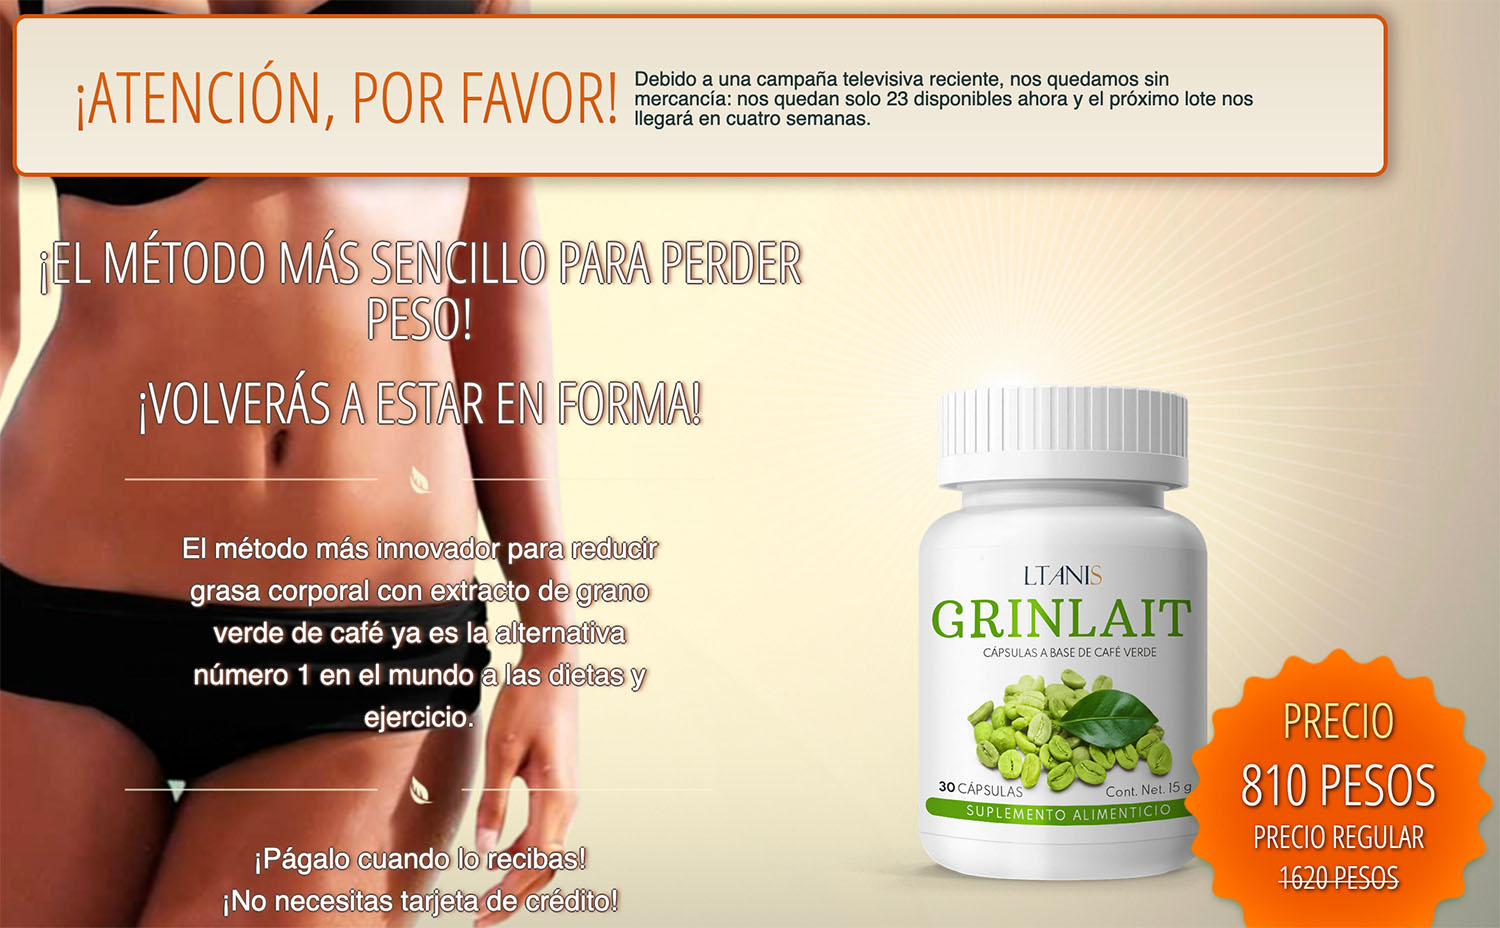 Where to purchase Grinlait tablets at Walmart in Guadalajara pharmacy?